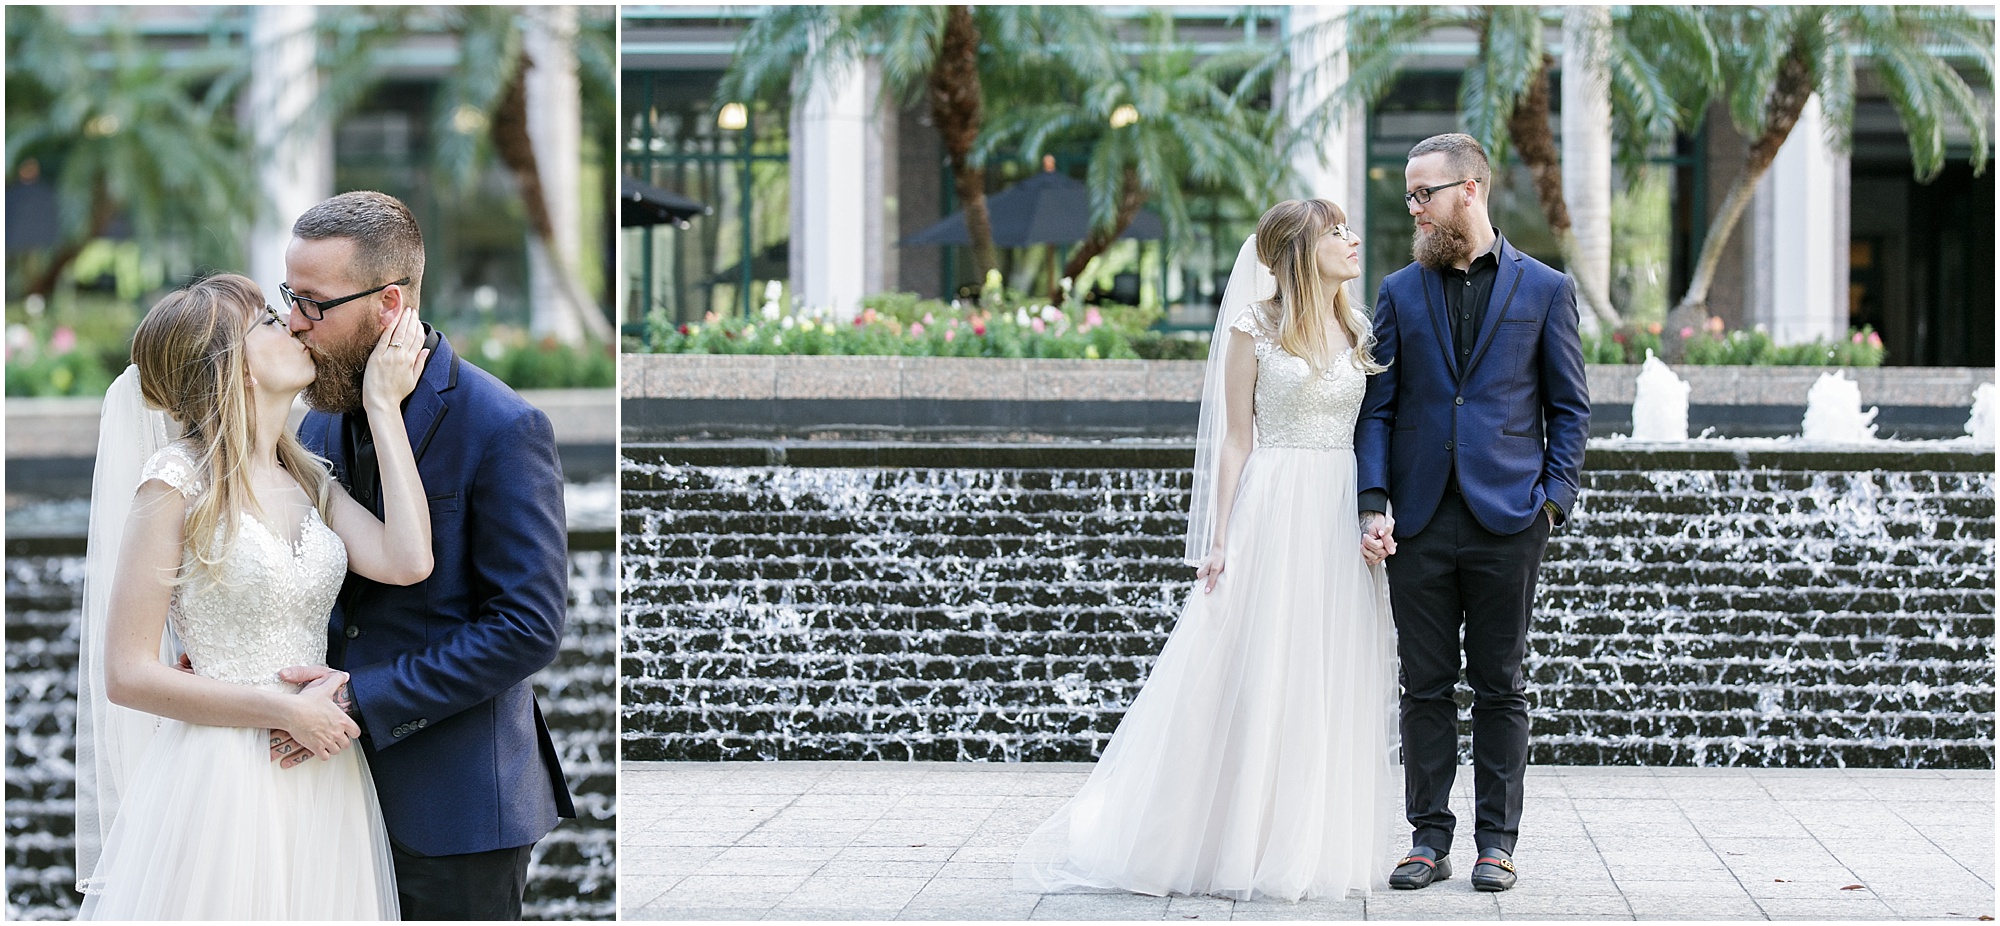 Bride and groom taking portraits in front of a fountain.